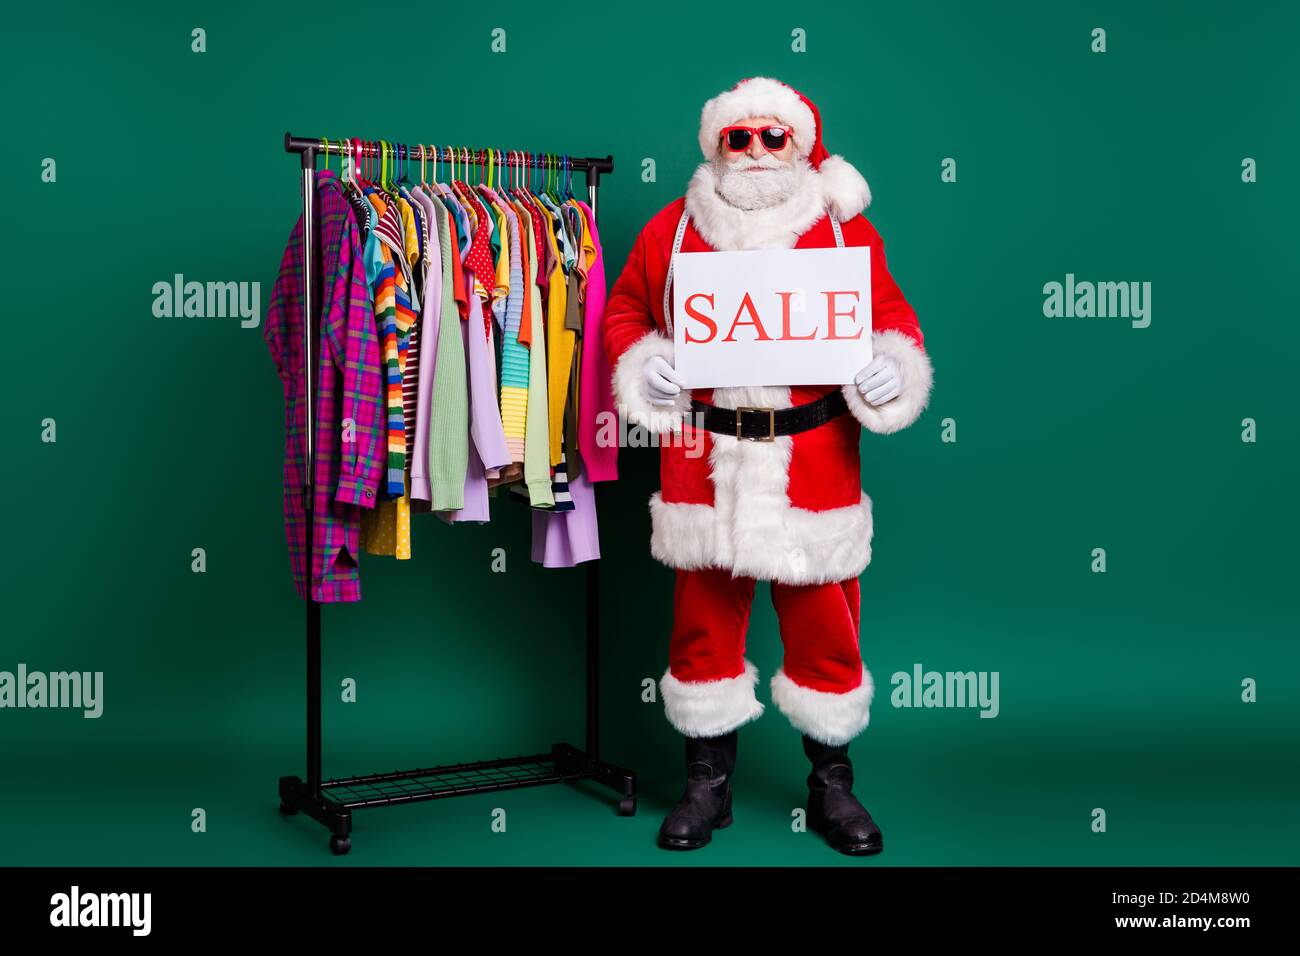 Full length body size view of his he nice fat funny Santa St Nicholas selling outlet season clothes holding in hands poster sale bargain aassortment Stock Photo